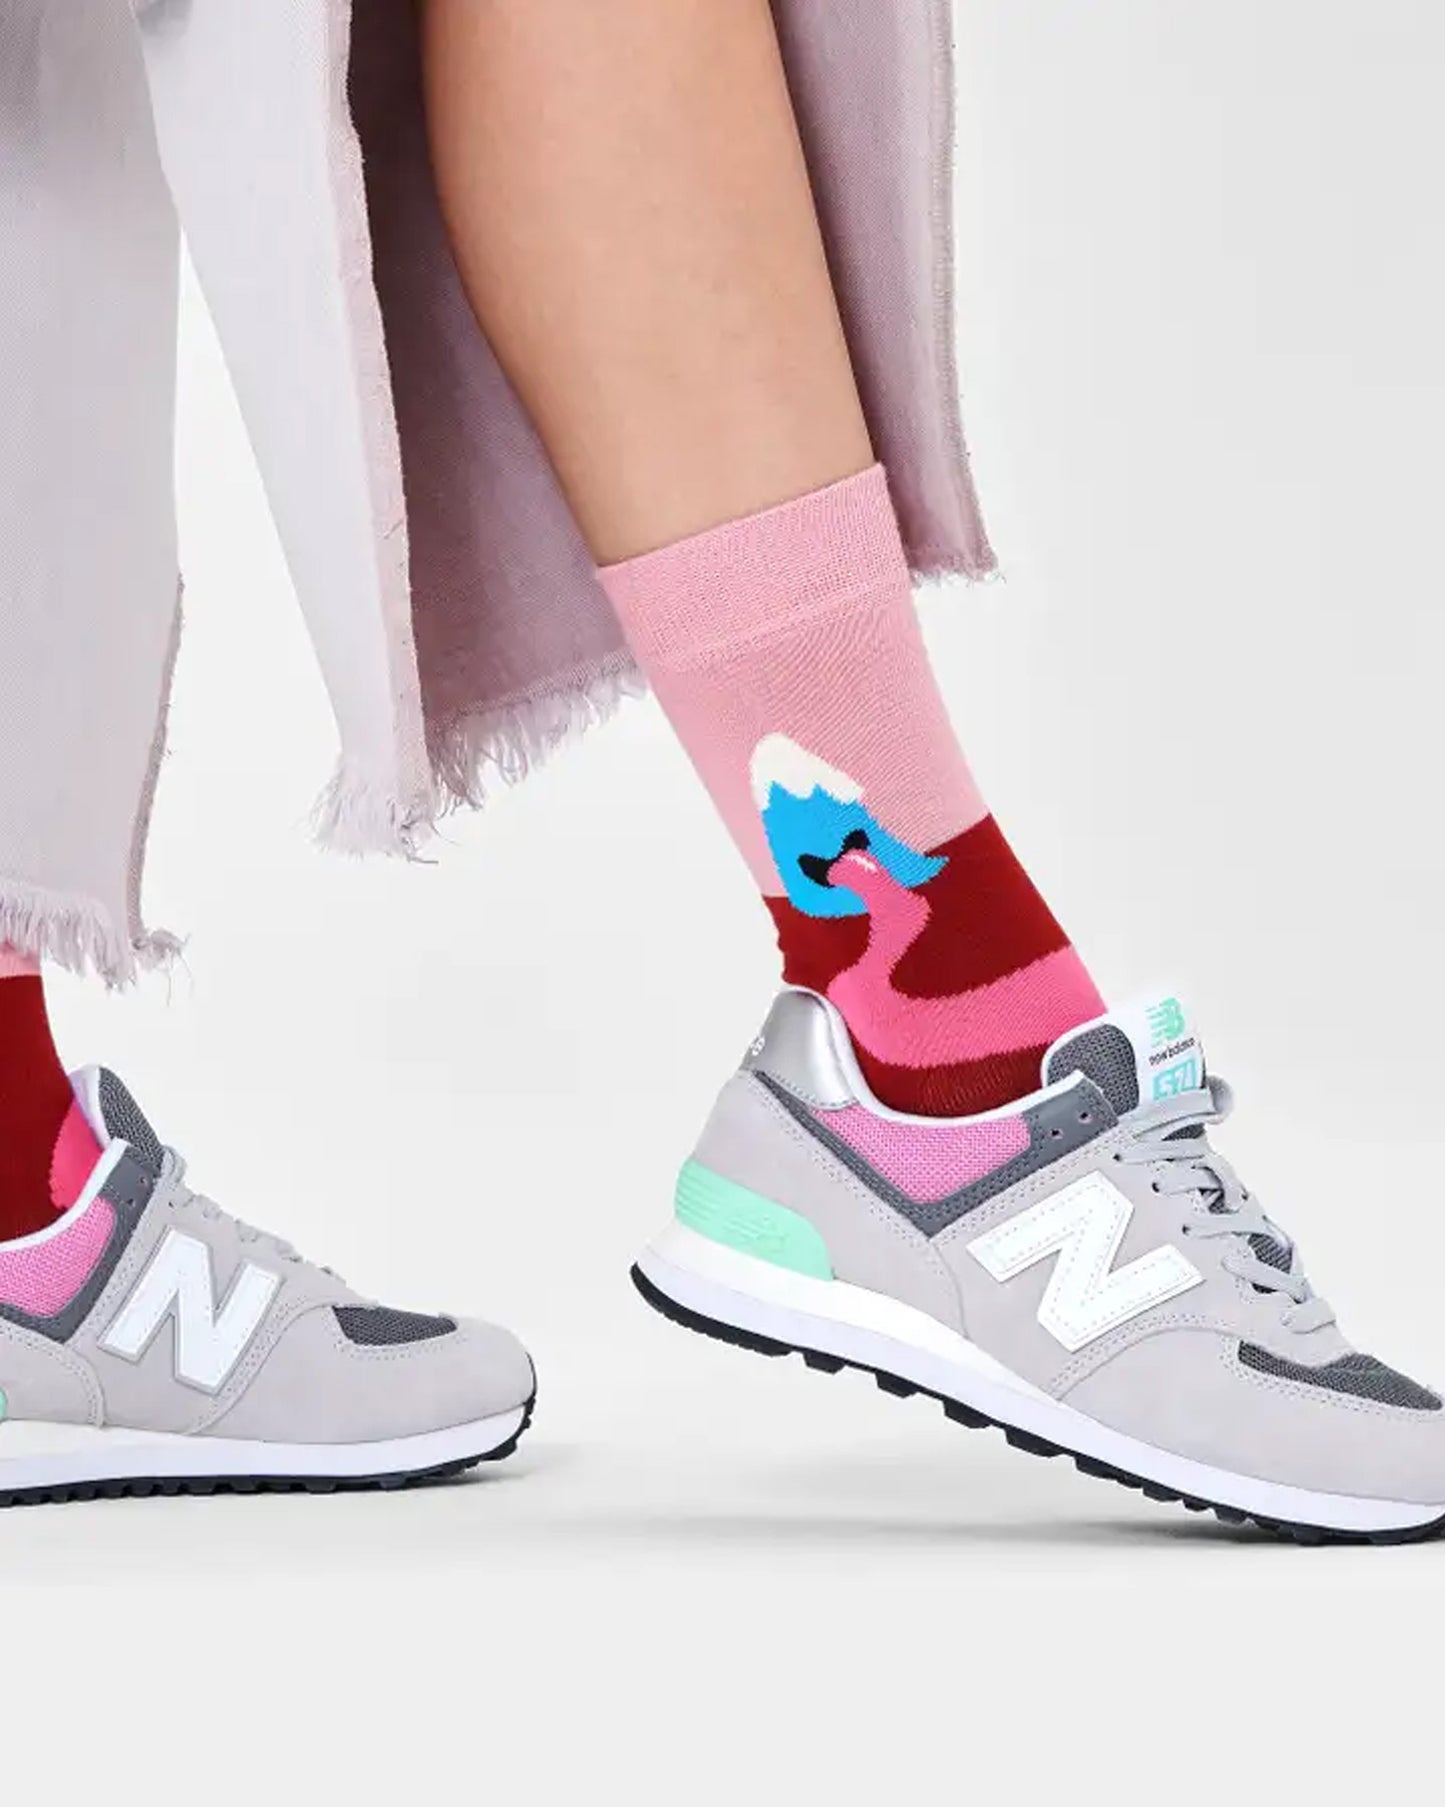 Happy Socks Mountain High Sock - Cotton crew length ankle sock with a personified volcano with pink lava flowing out of its mouth onto a maroon coloured ground against a pale pink sky worn with trainers and cut off denim jeans.